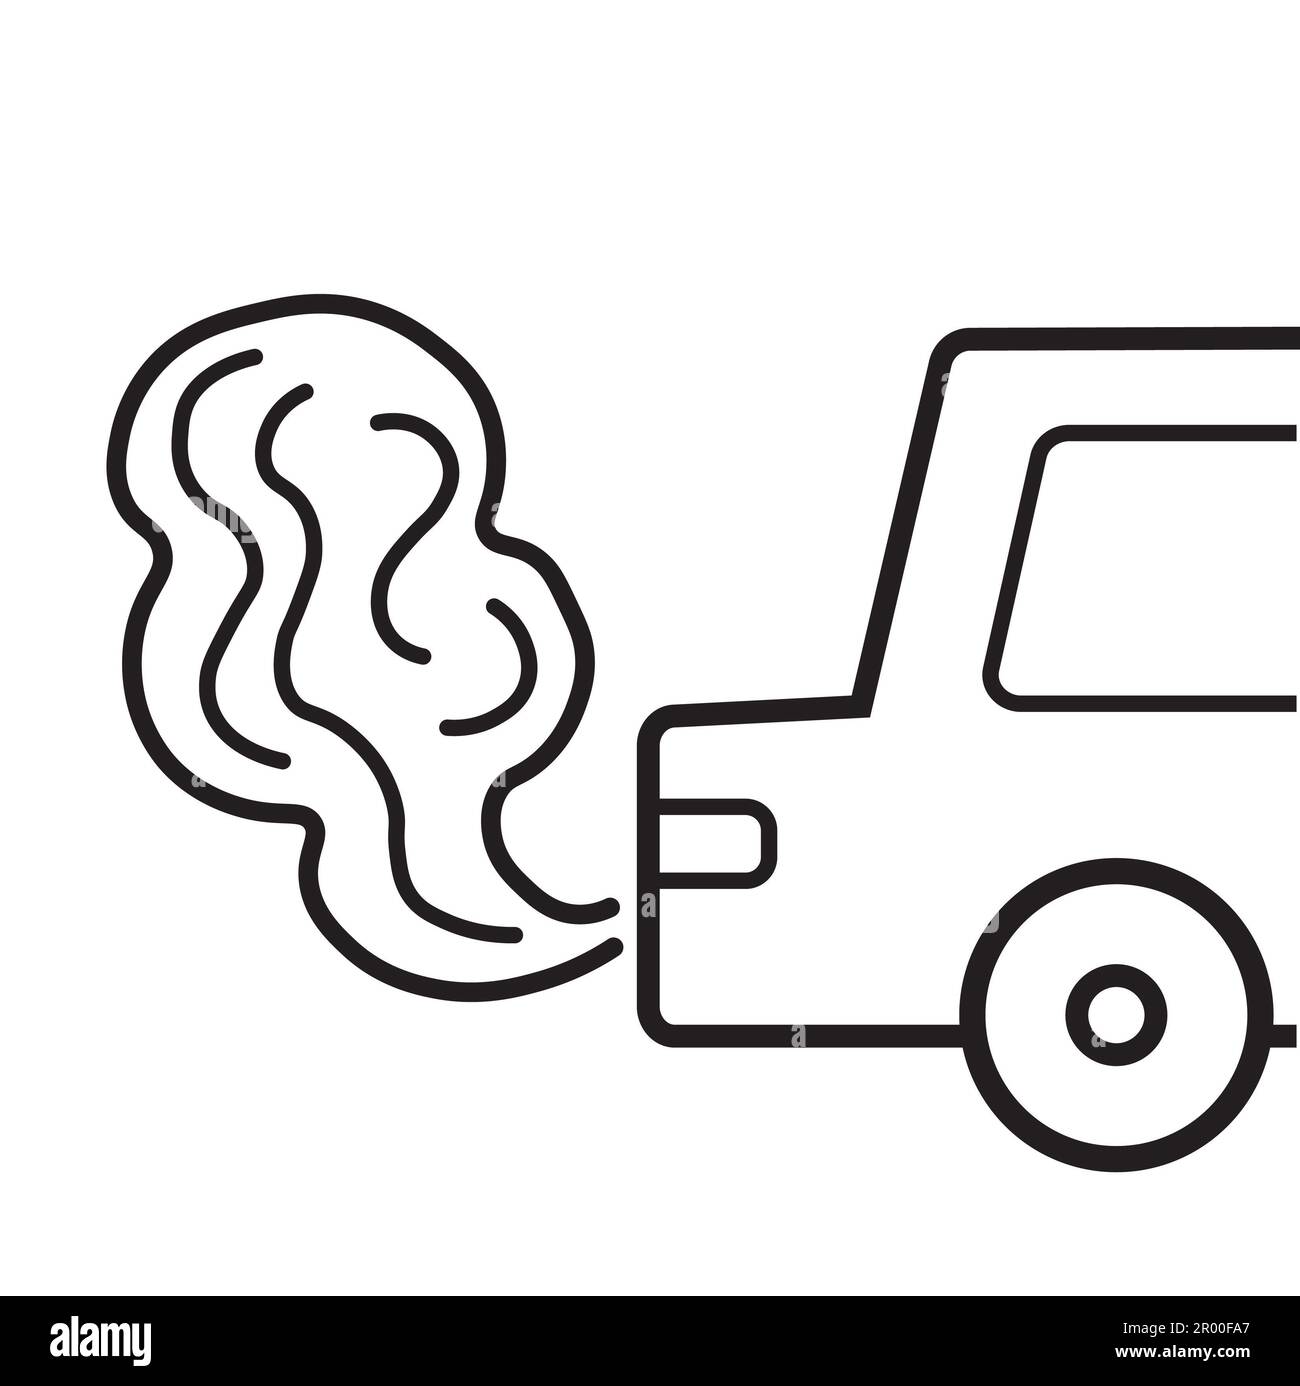 Car vehicle exhaust with smoke caused air pollution. Greenhouse gas emissions crisis, global warming and climate change concept. Stock Photo